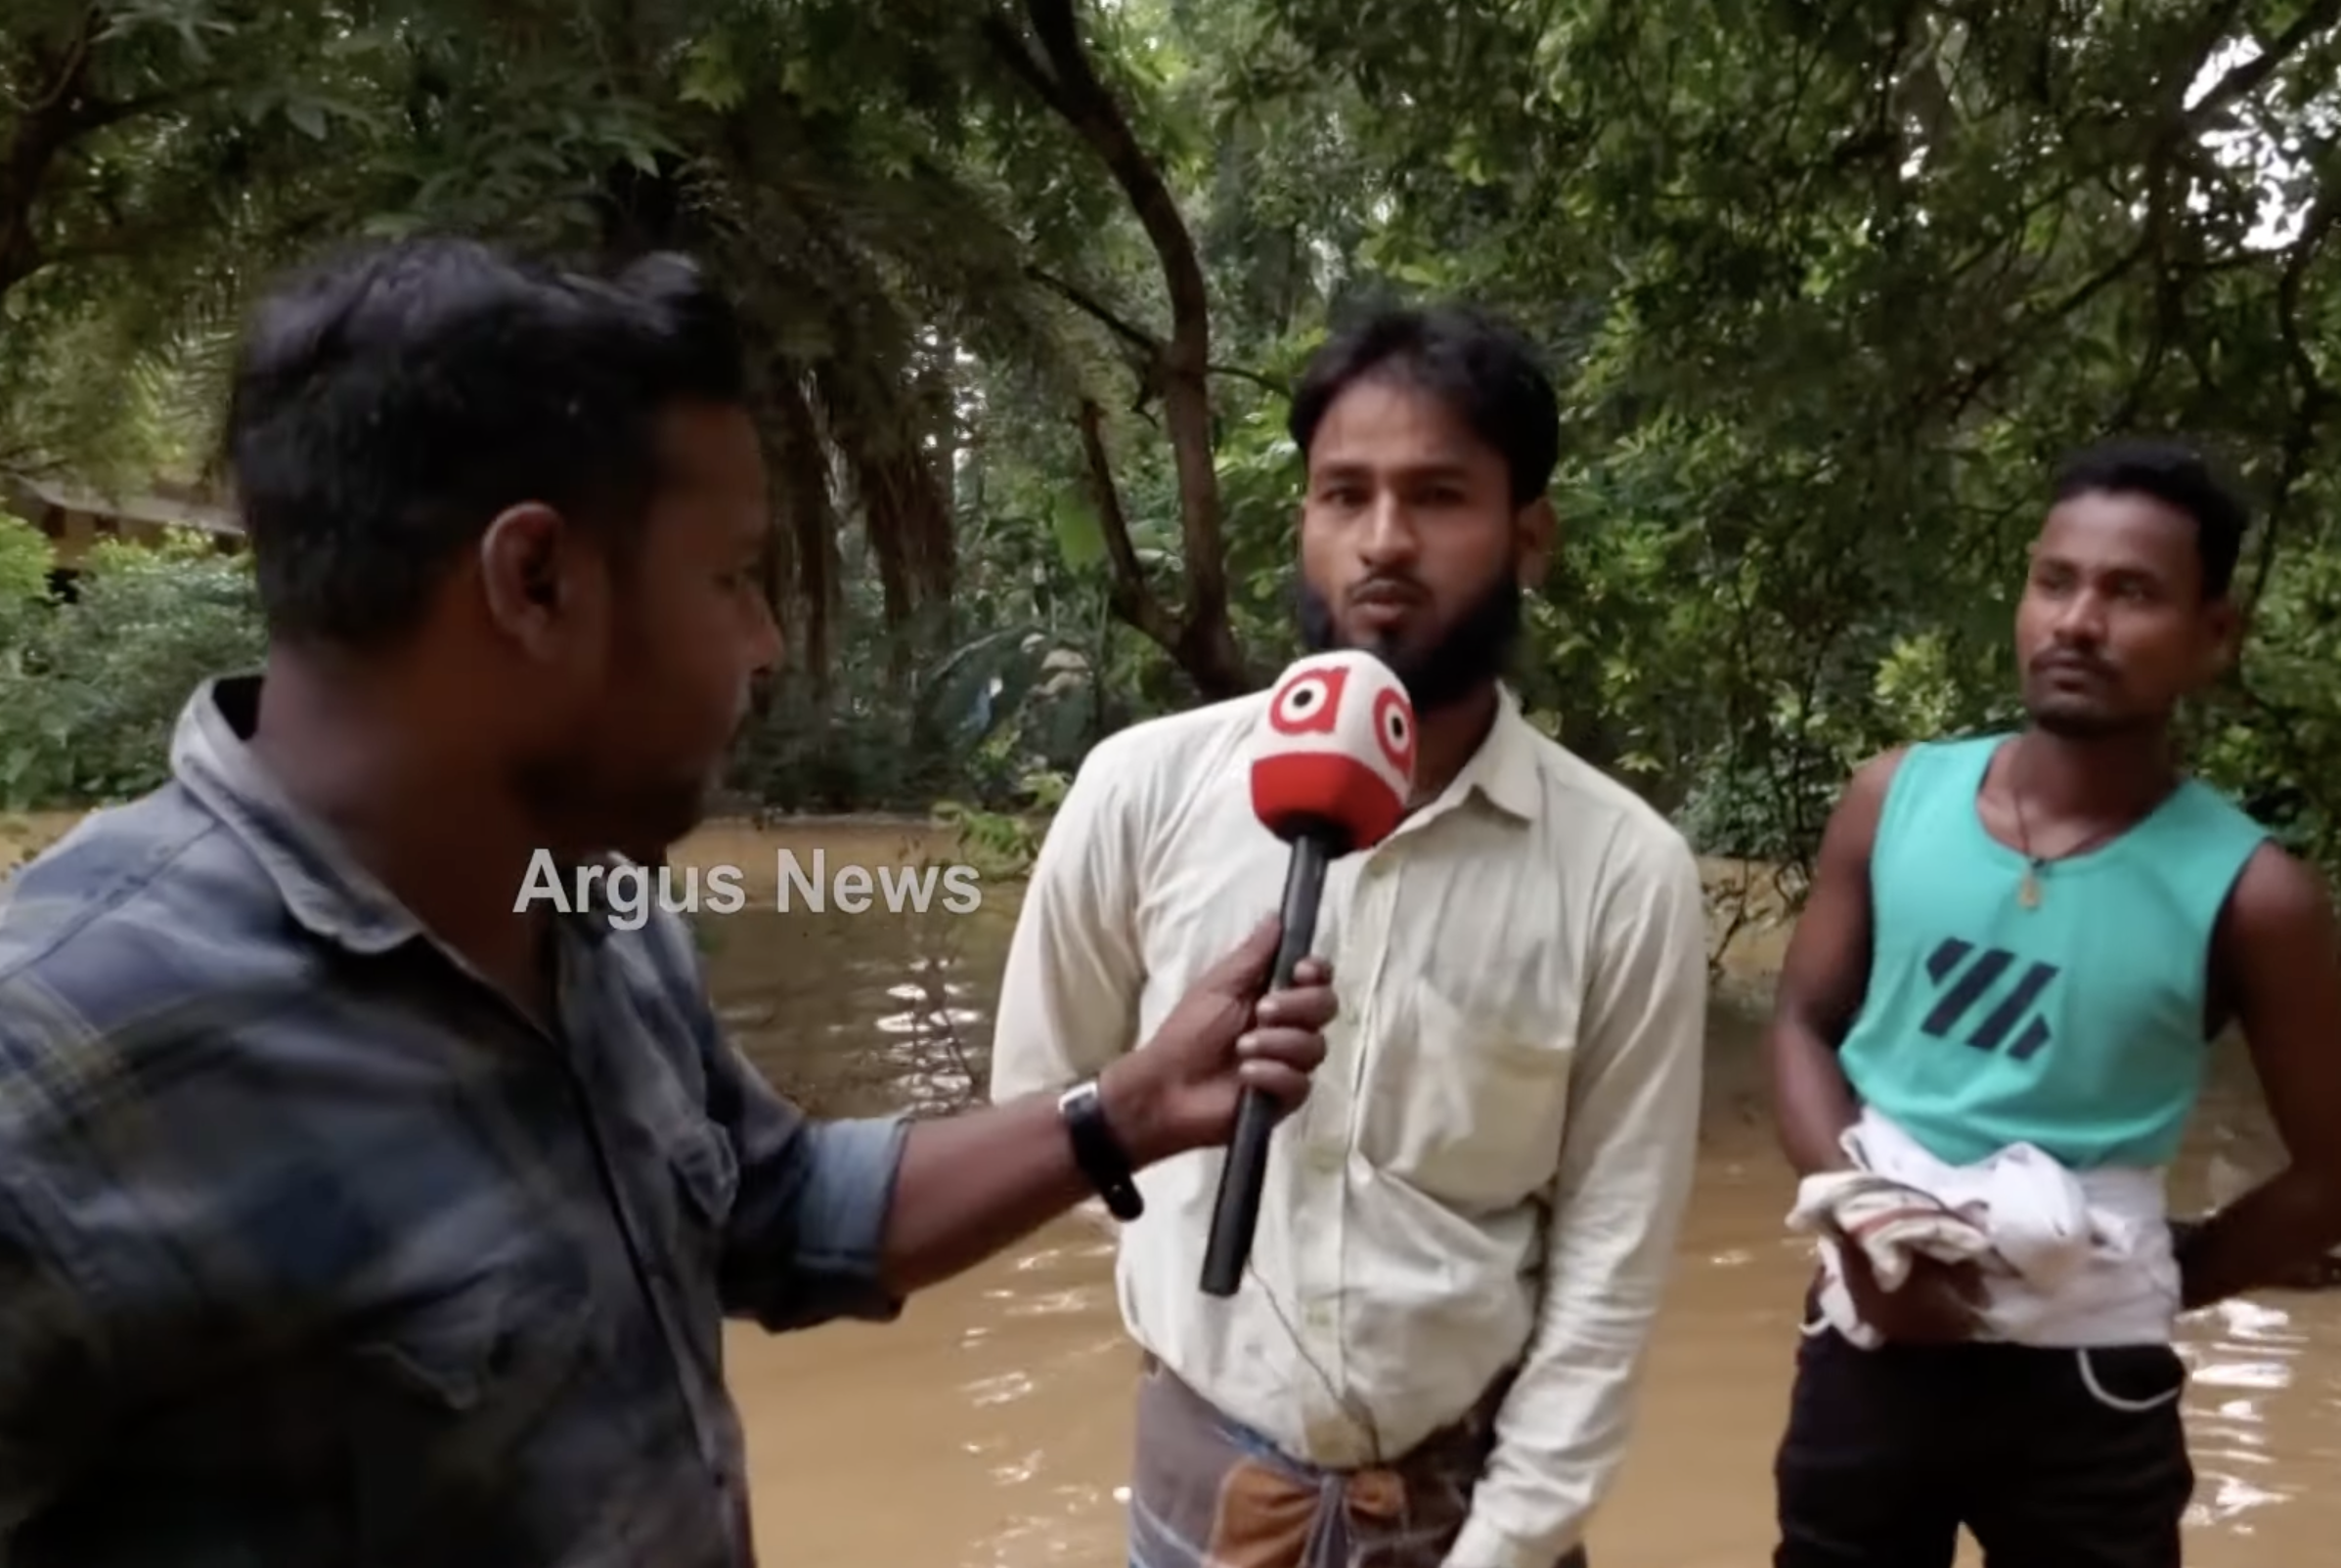 Reporter interviews residents of a region flooded by a natural disaster.